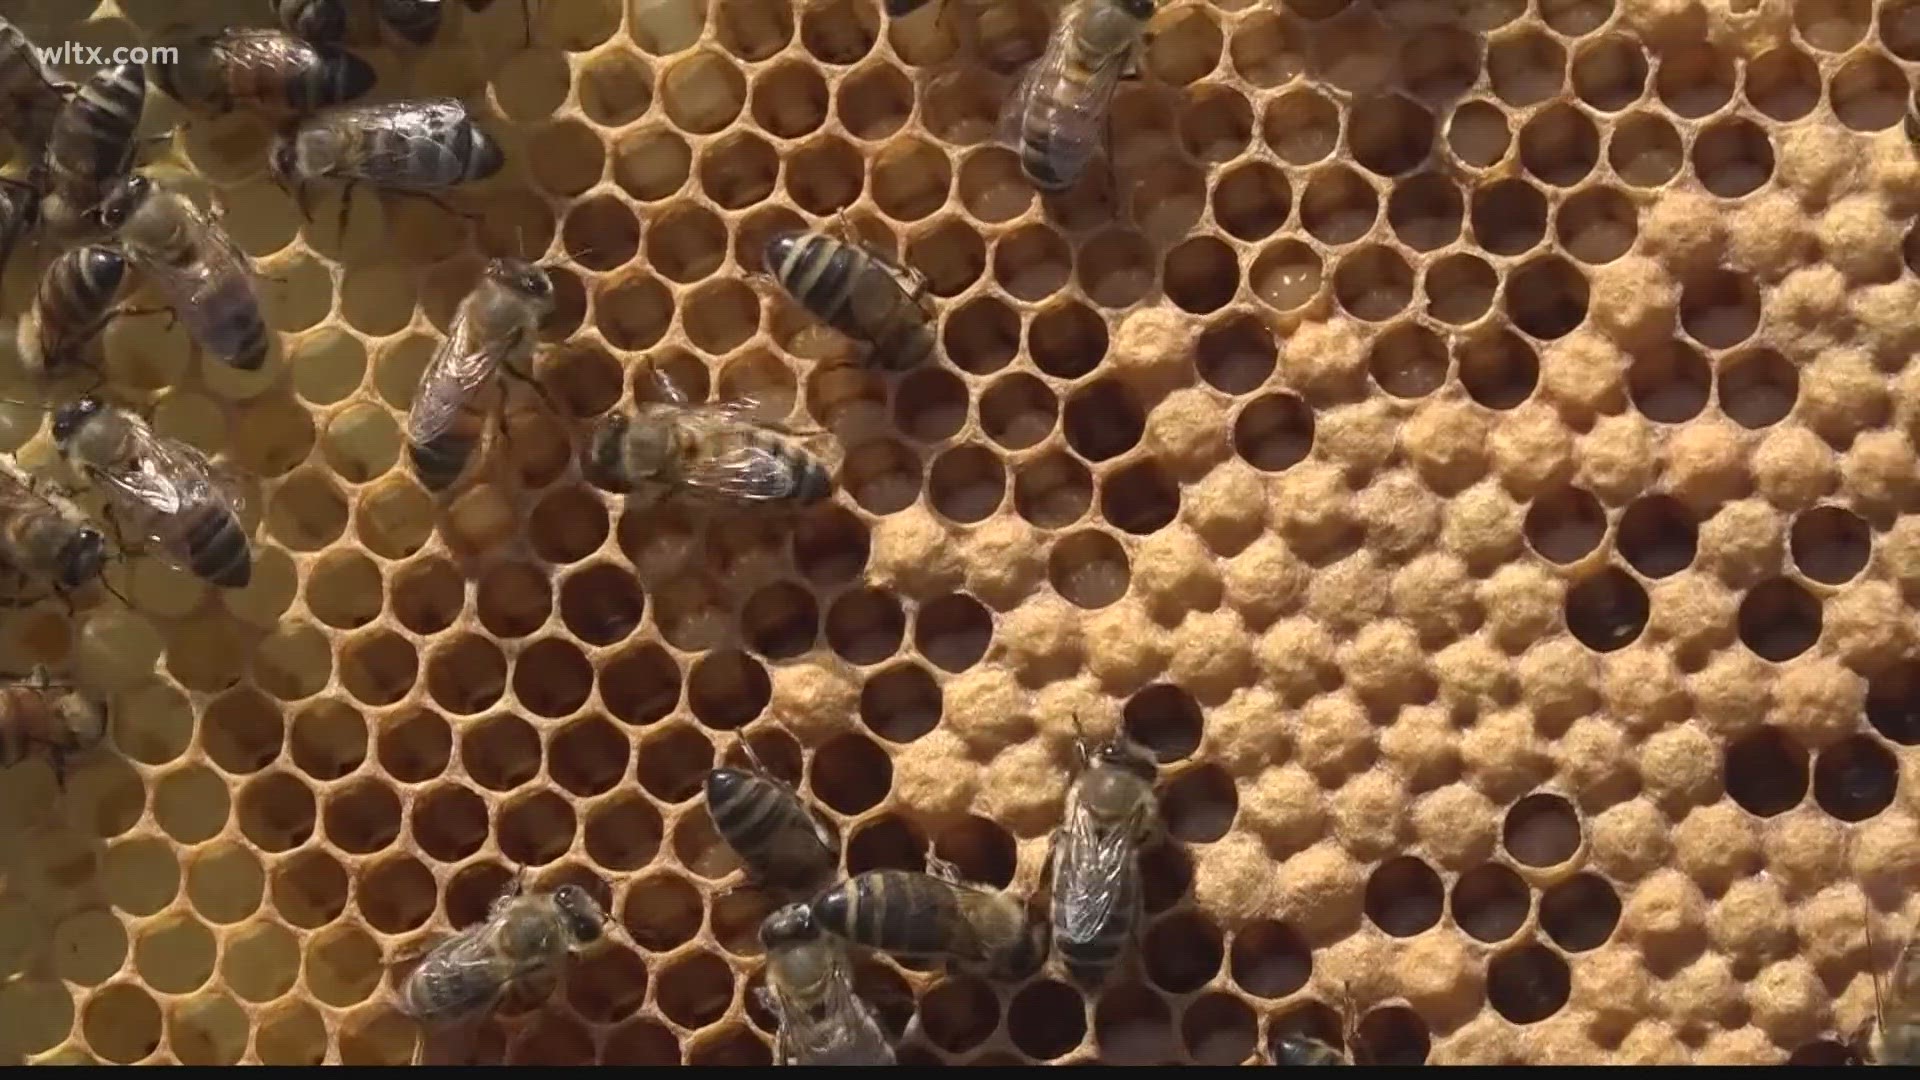 Hundreds of bee species play a crucial role in sustaining life, and South Carolina experts are sharing ways to help protect them.